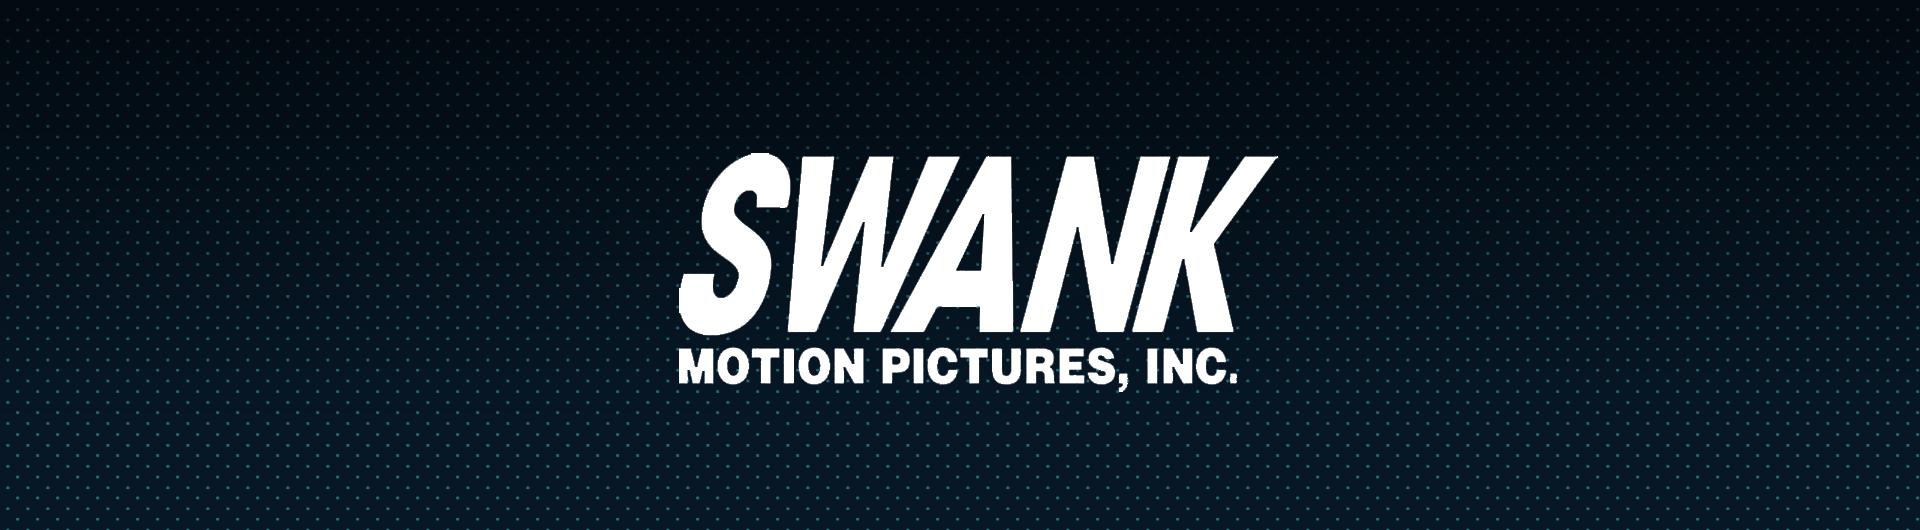 Swank Motion Pictures Inc.